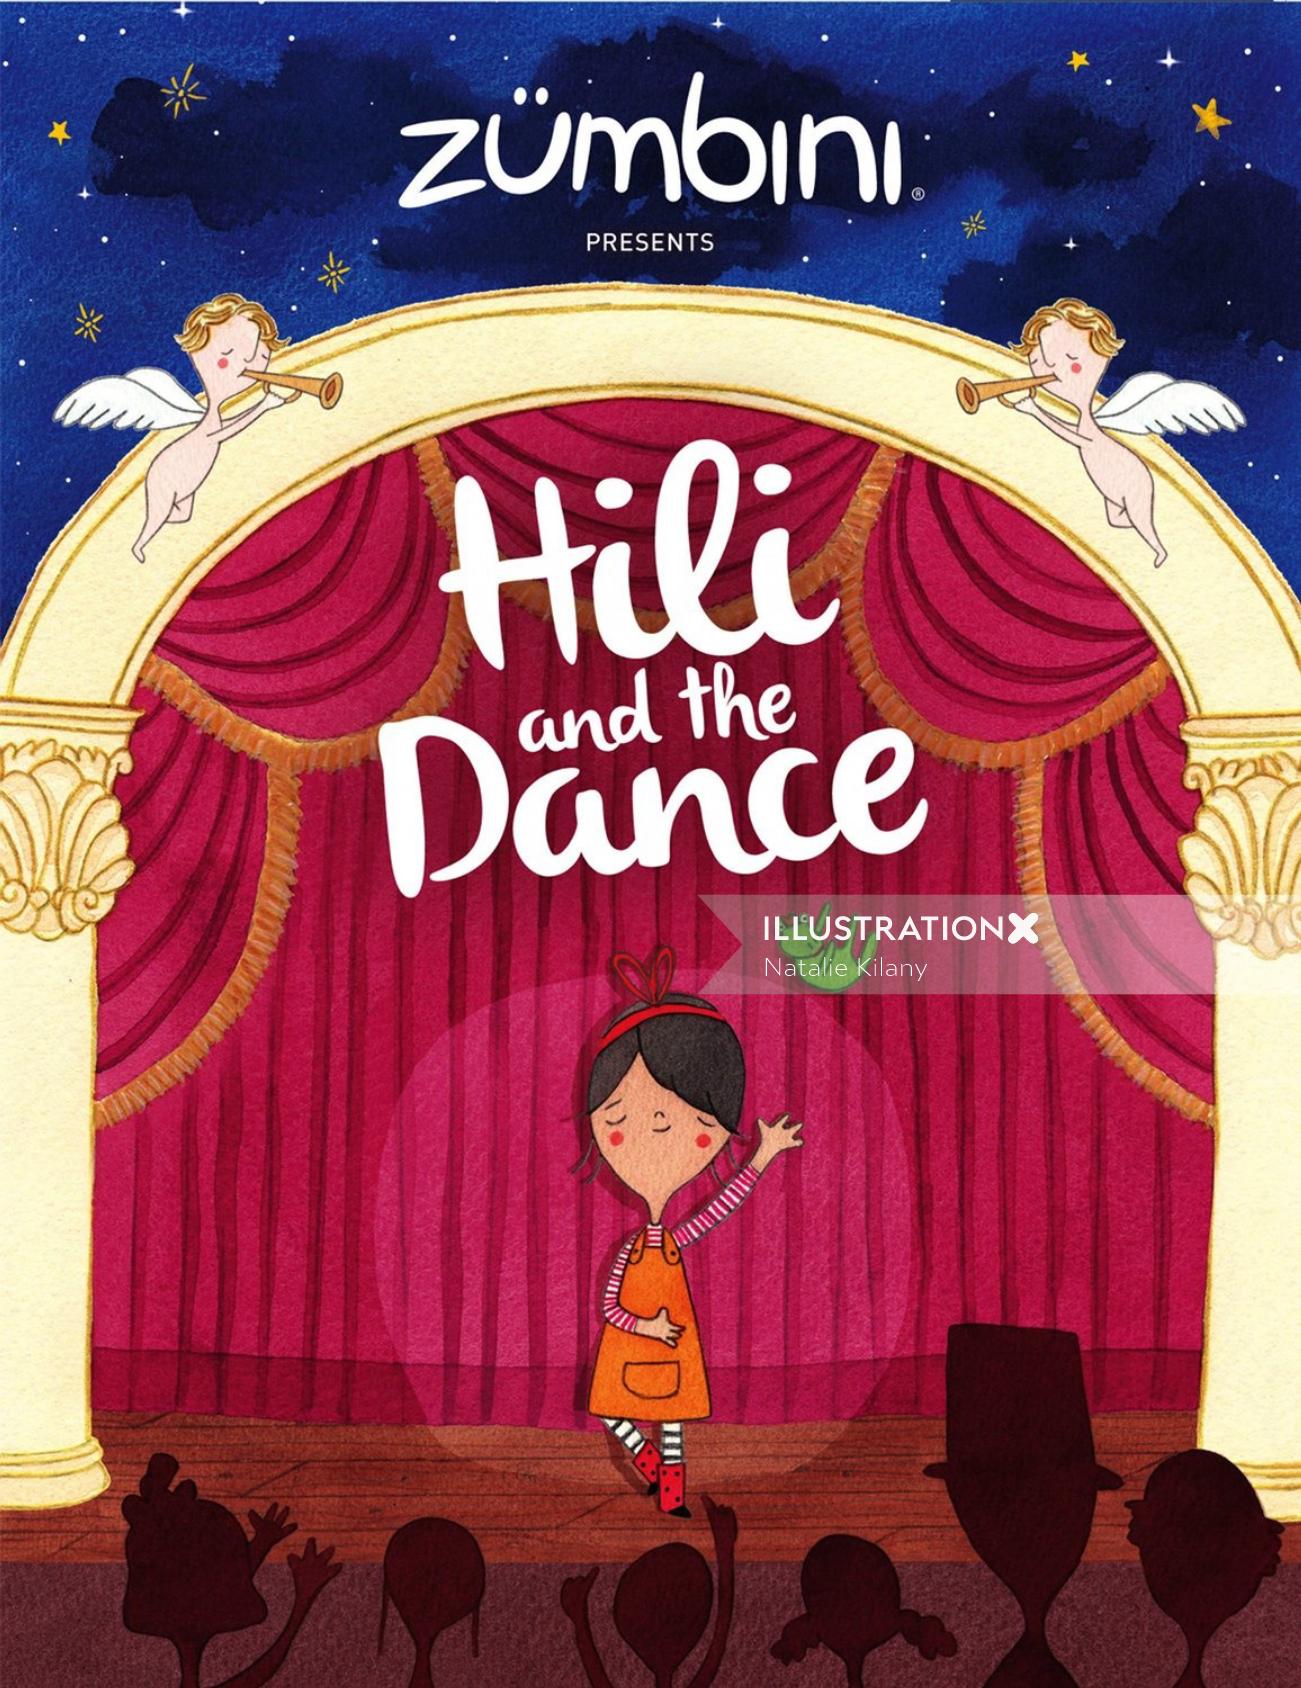 Hili and the Dance editorial artwork